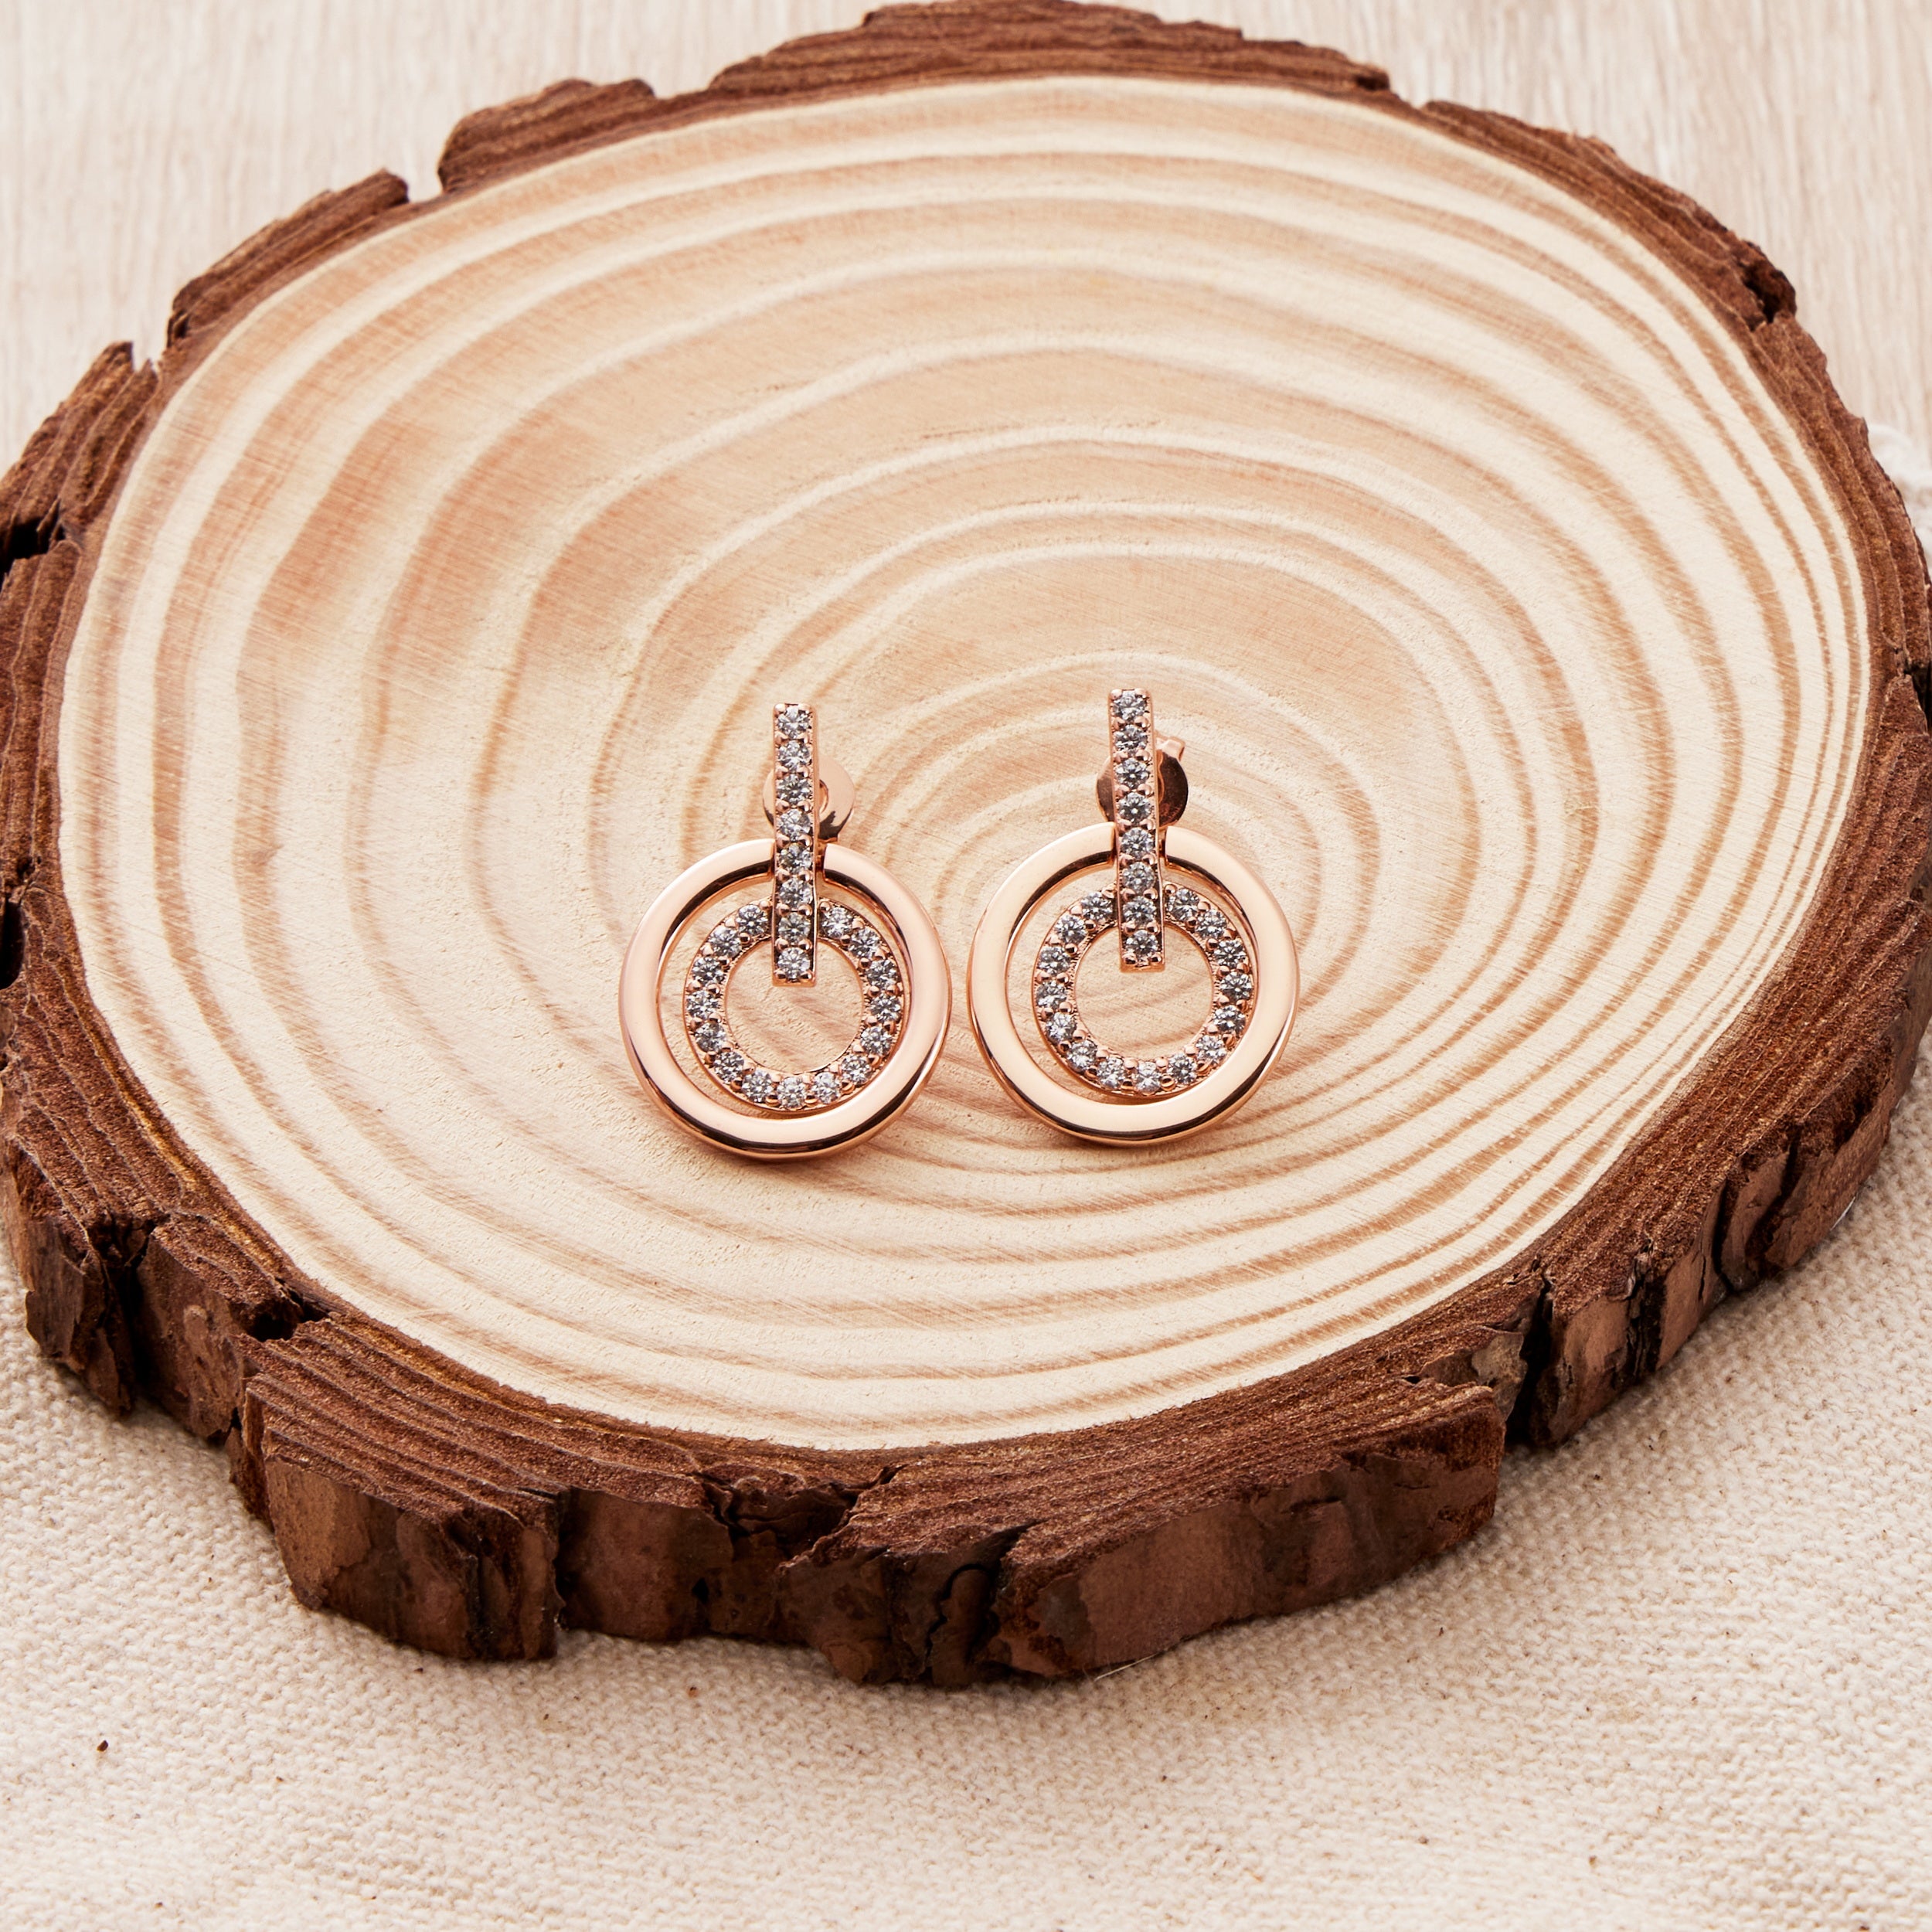 Rose Gold Plated Double Circle Drop Earrings Created with Zircondia® Crystals